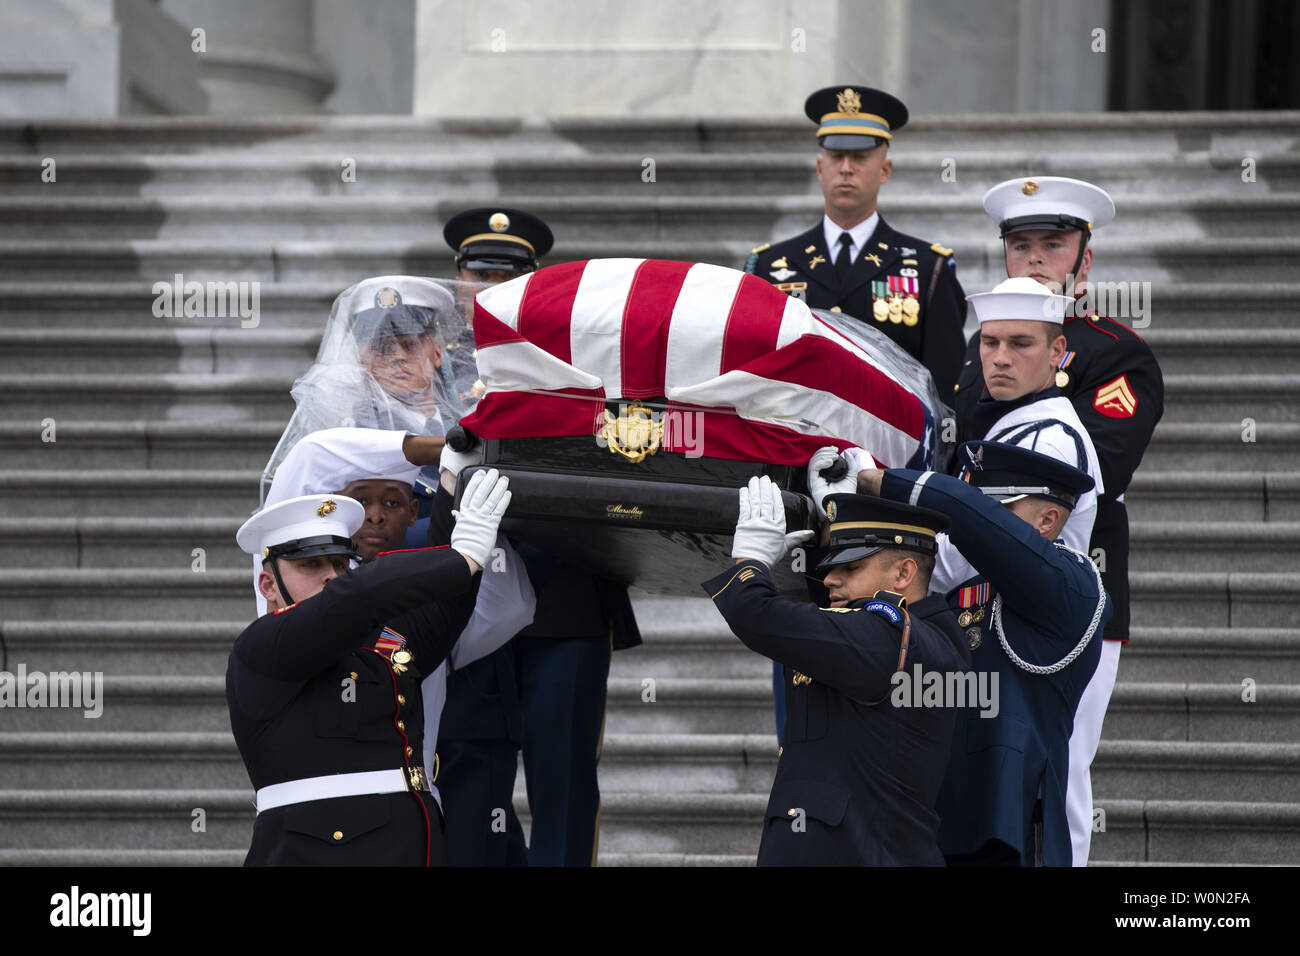 Joint service members of a military casket team carry the casket of Senator John McCain from the US Capitol to a motorcade that will ferry him to a funeral service at the National Cathedral in Washington, DC,  September 1, 2018. McCain died August 25, 2018 from brain cancer at his ranch in Sedona, Arizona, USA. He was a veteran of the Vietnam War, served two terms in the US House of Representatives, and was elected to five terms in the US Senate. McCain also ran for president twice, and was the Republican nominee in 2008.       Photo by Jim Lo Scalzo/UPI Stock Photo